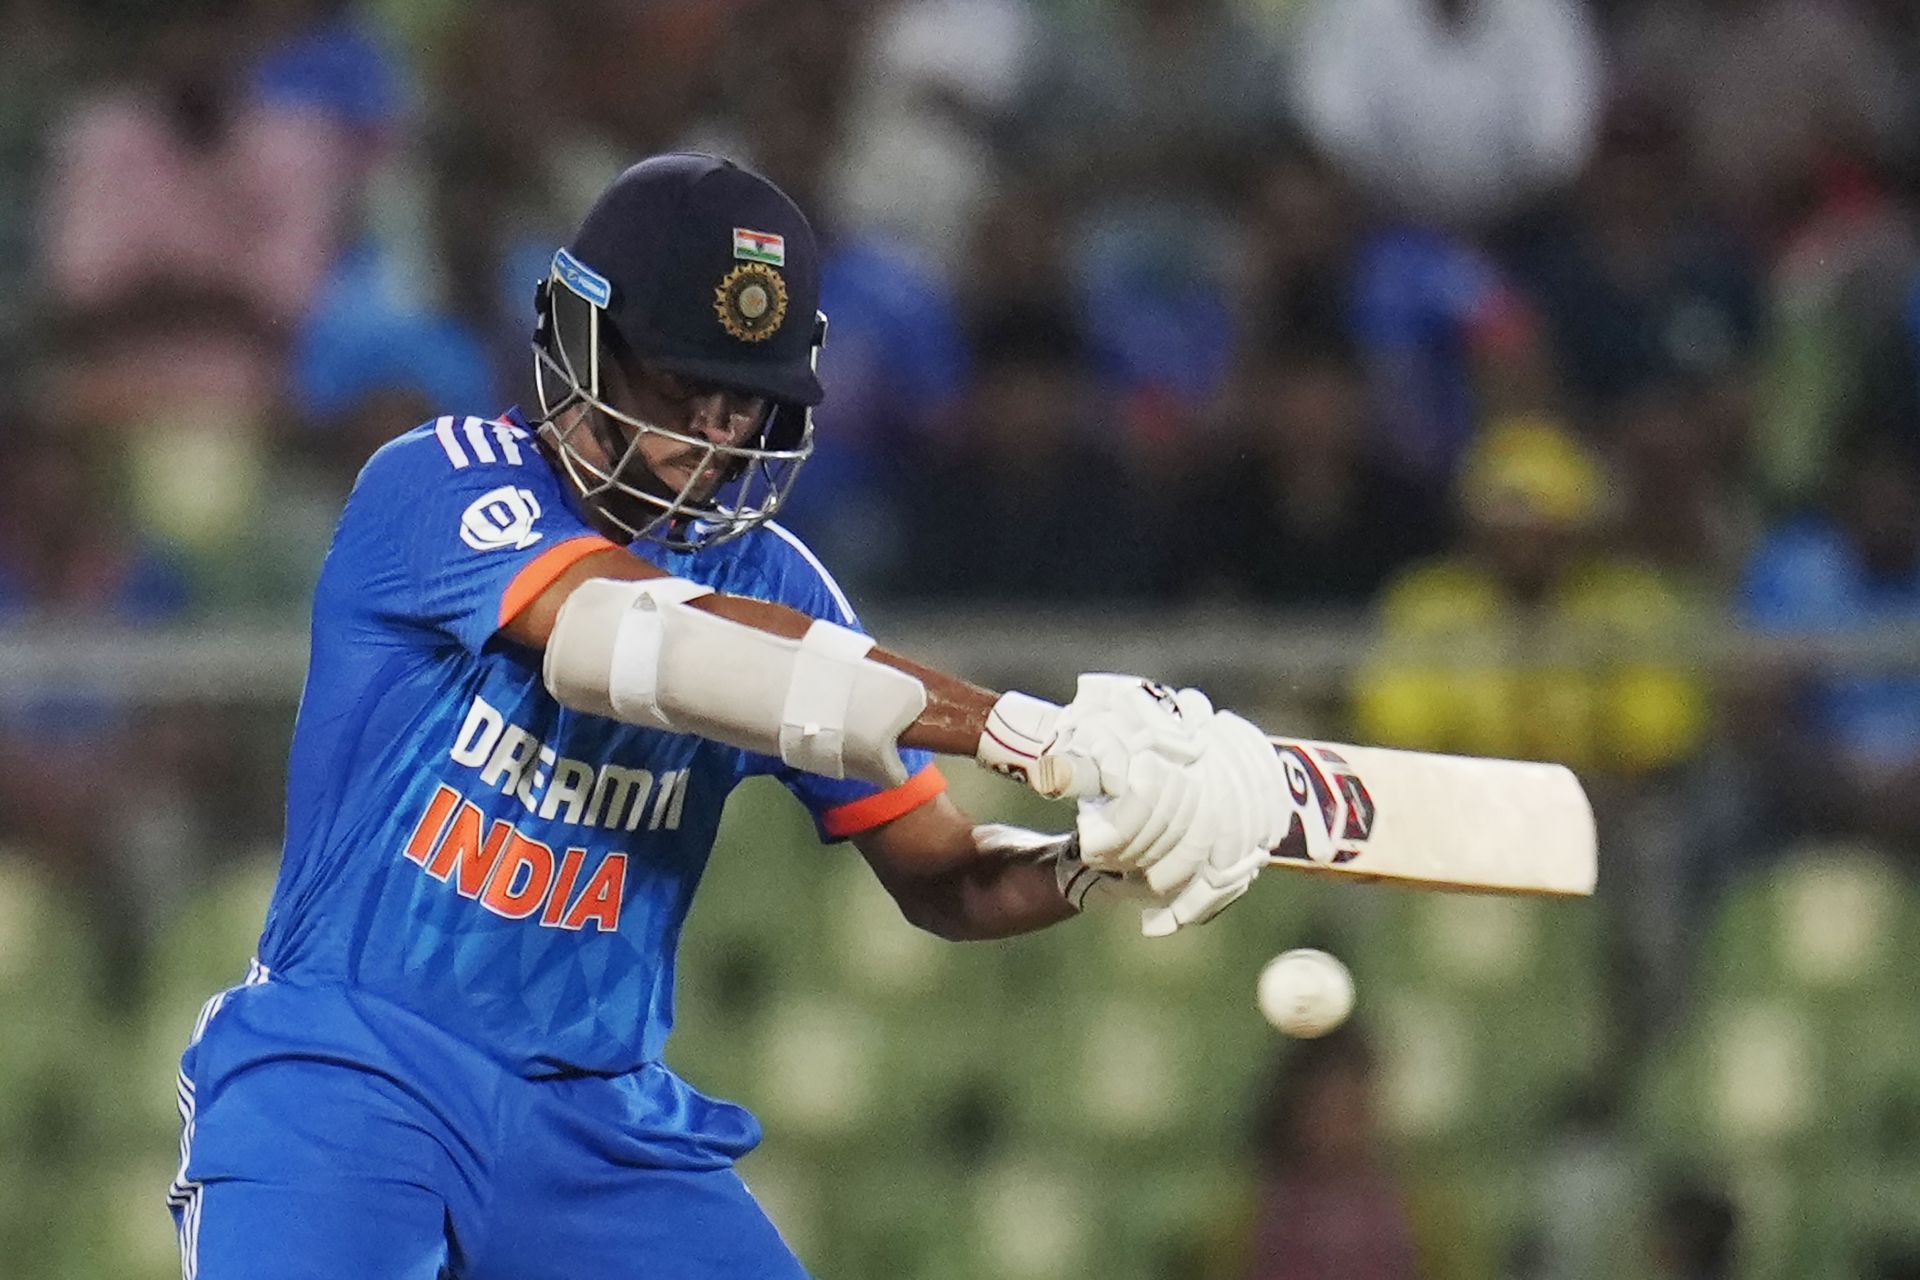 India were given a flying start by their dashing opener